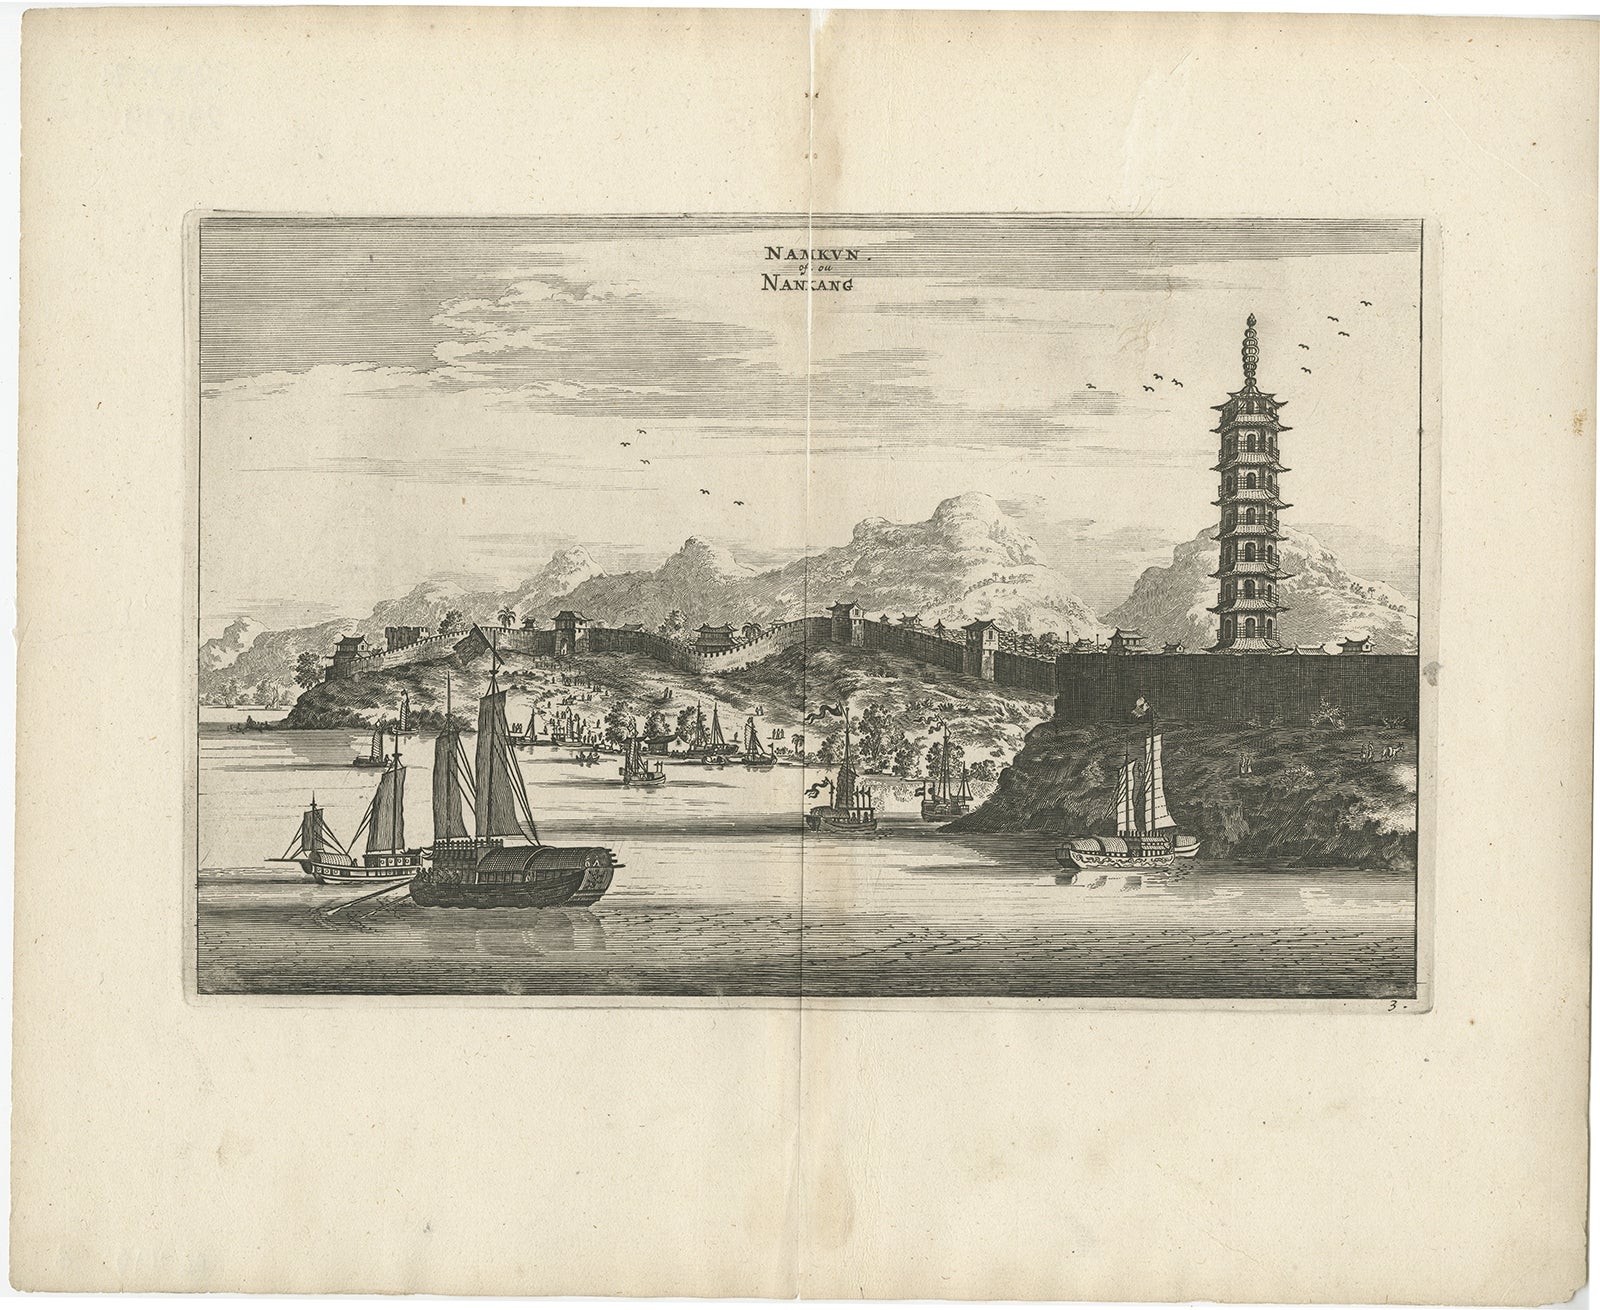 Antique print China titled 'Namkan of ou Nankang'. Old print depicting a view of the Chinese city of Nanjing with its ramparts. Behind the city wall a pagoda can be seen. This print originates from the Latin edition of Nieuhof's work titled 'Legatio